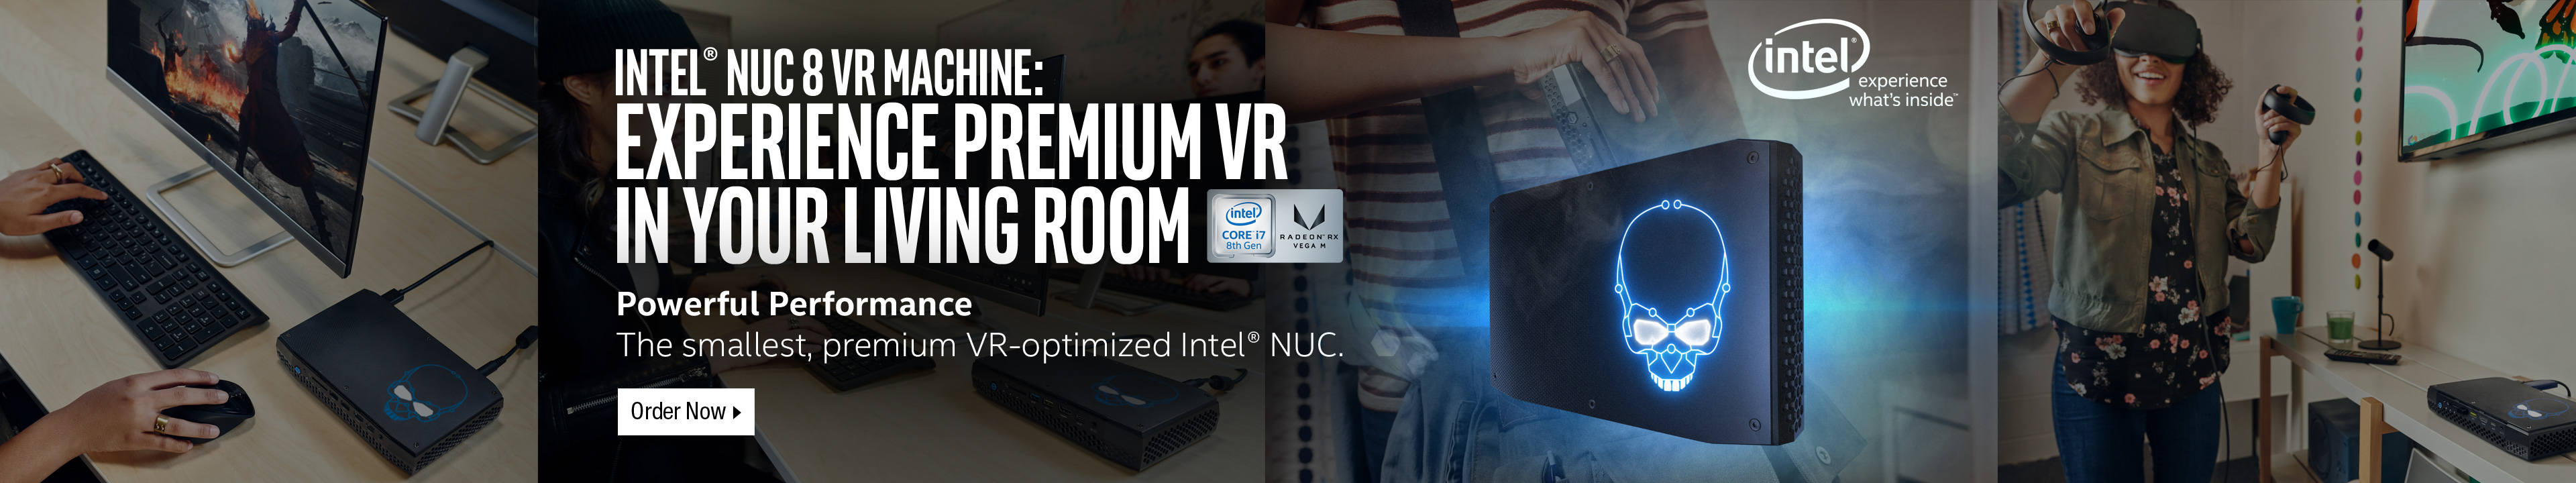 EXPERIENCE PREMIUM VR IN YOUR LIVING ROOM